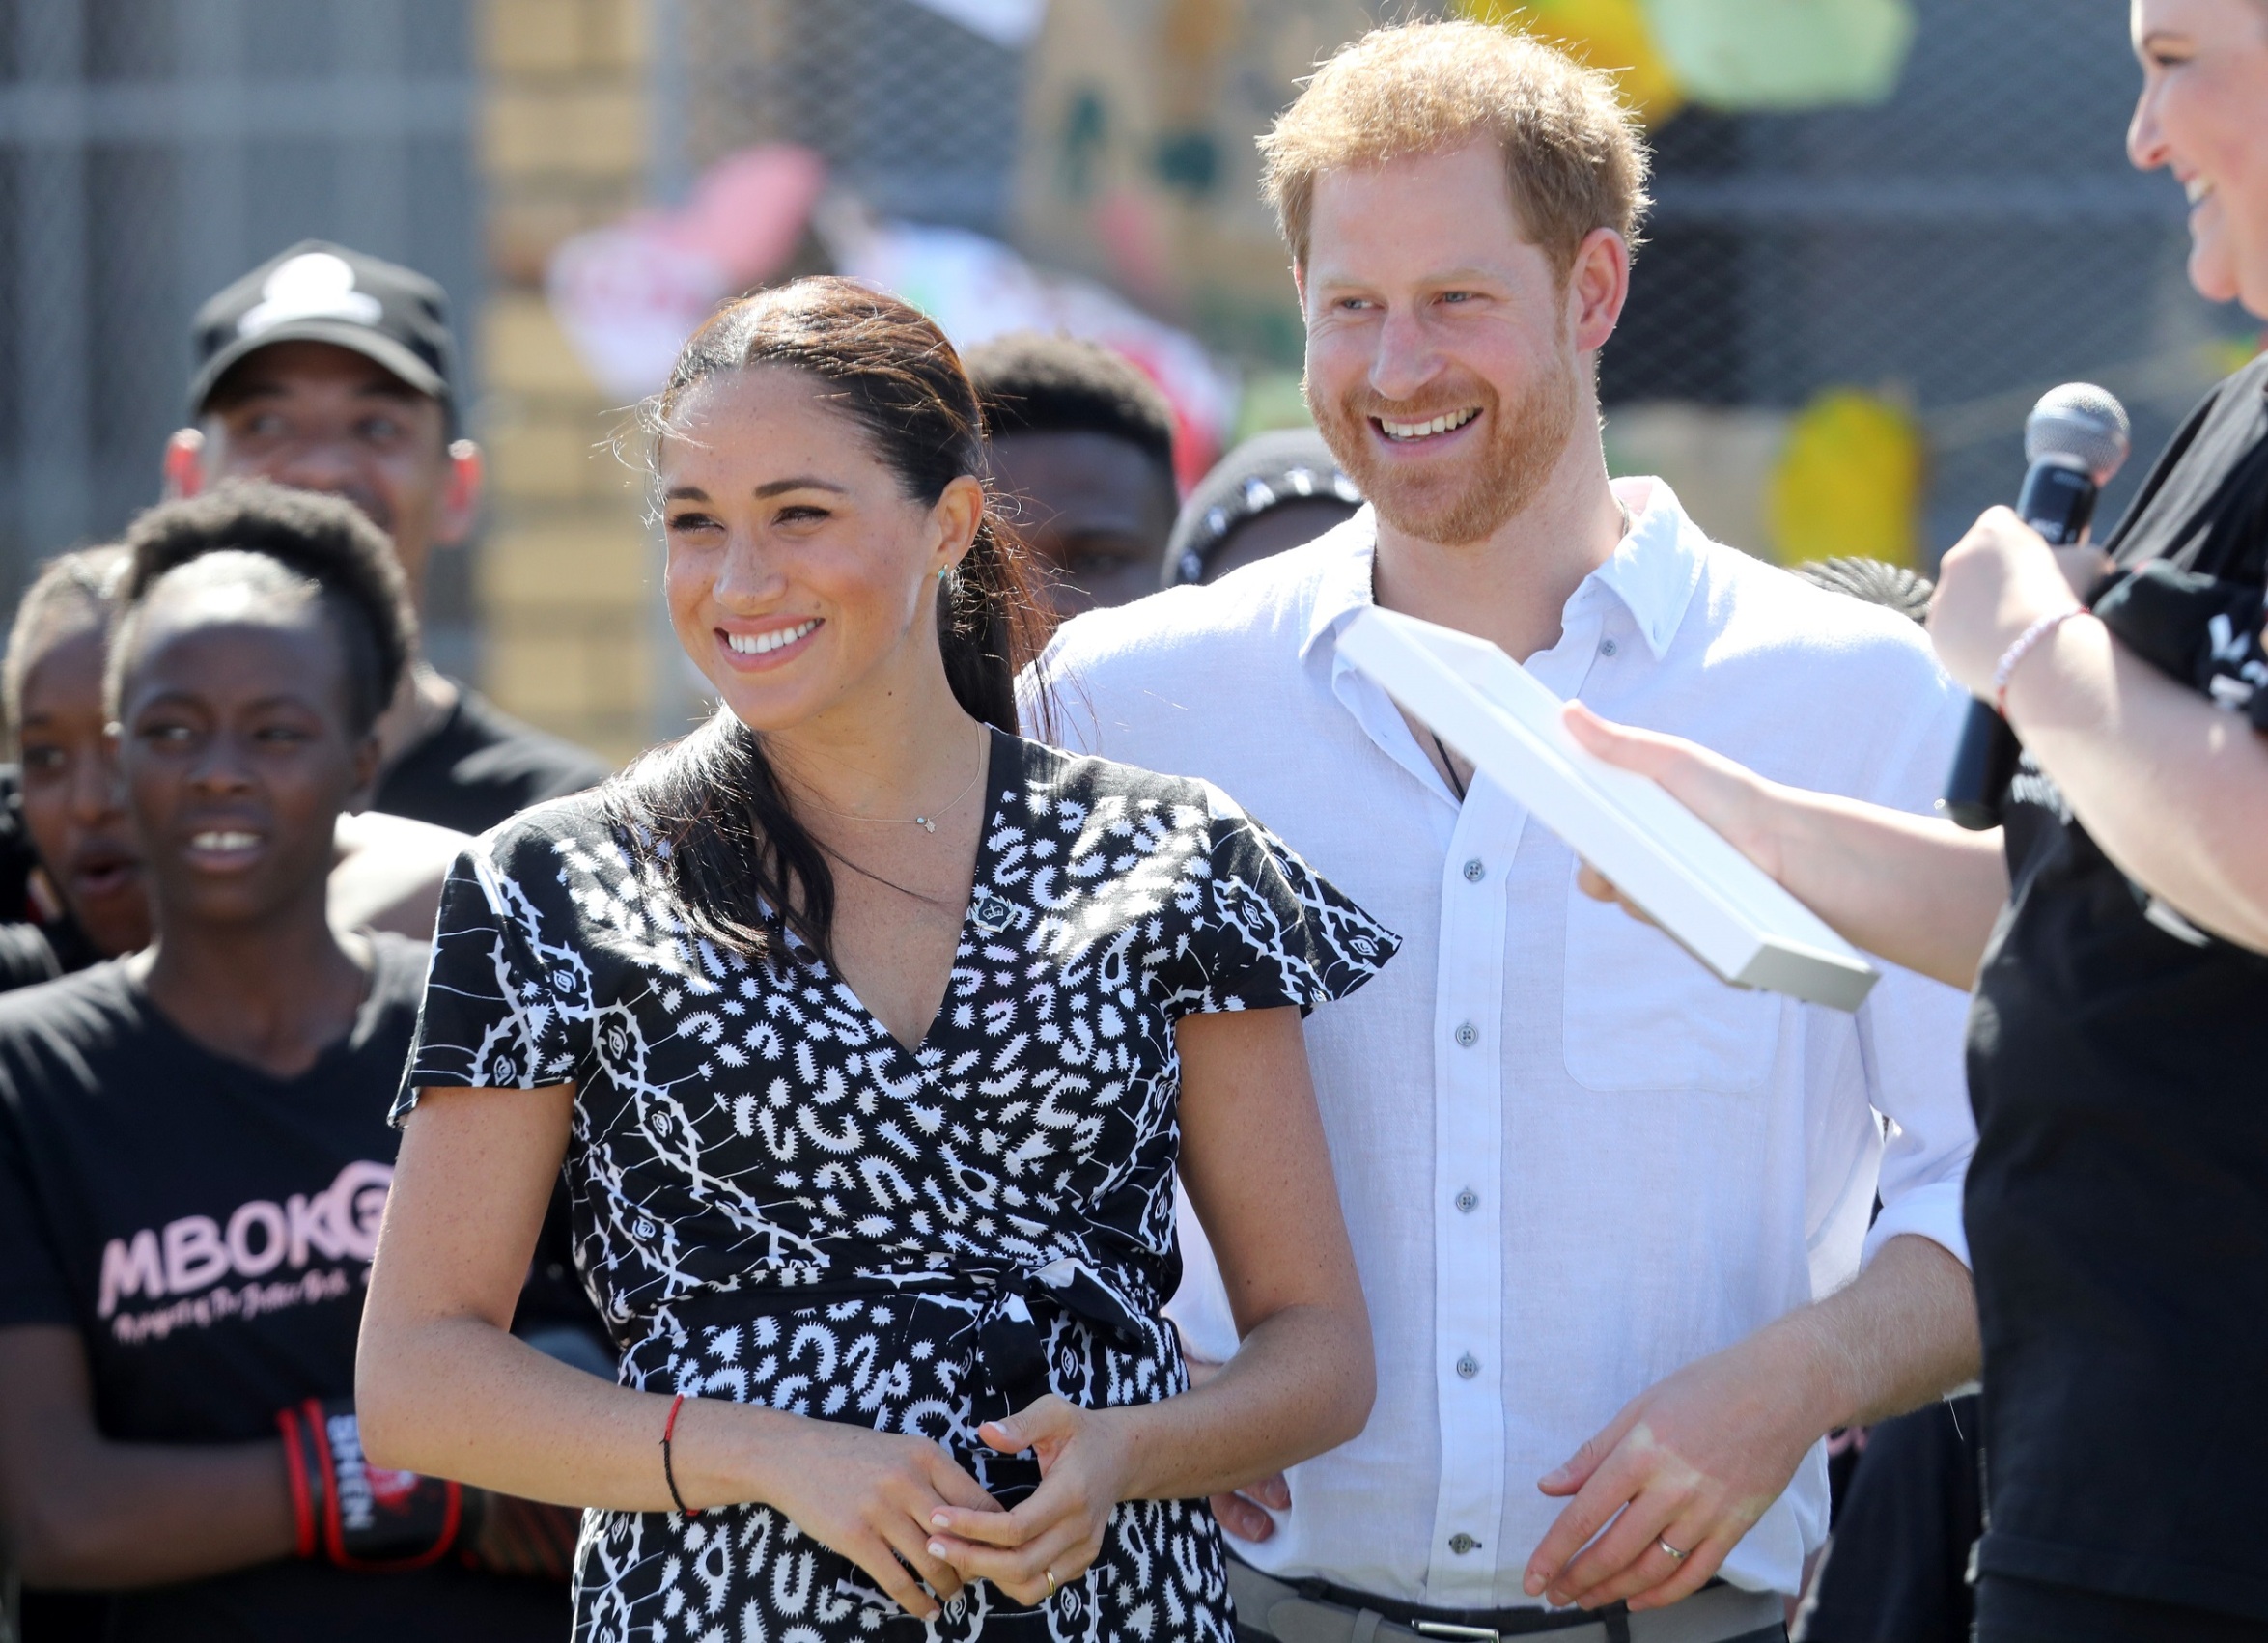 CAPE TOWN, SOUTH AFRICA - SEPTEMBER 23: Meghan, Duchess of Sussex and Prince Harry, Duke of Sussex smile as they visit a Justice Desk initiative in Nyanga township, during their royal tour of South Africa on September 23, 2019 in Cape Town, South Africa. The Justice Desk initiative teaches children about their rights and provides self-defence classes and female empowerment training to young girls in the community.  (Photo by Chris Jackson/Getty Images)